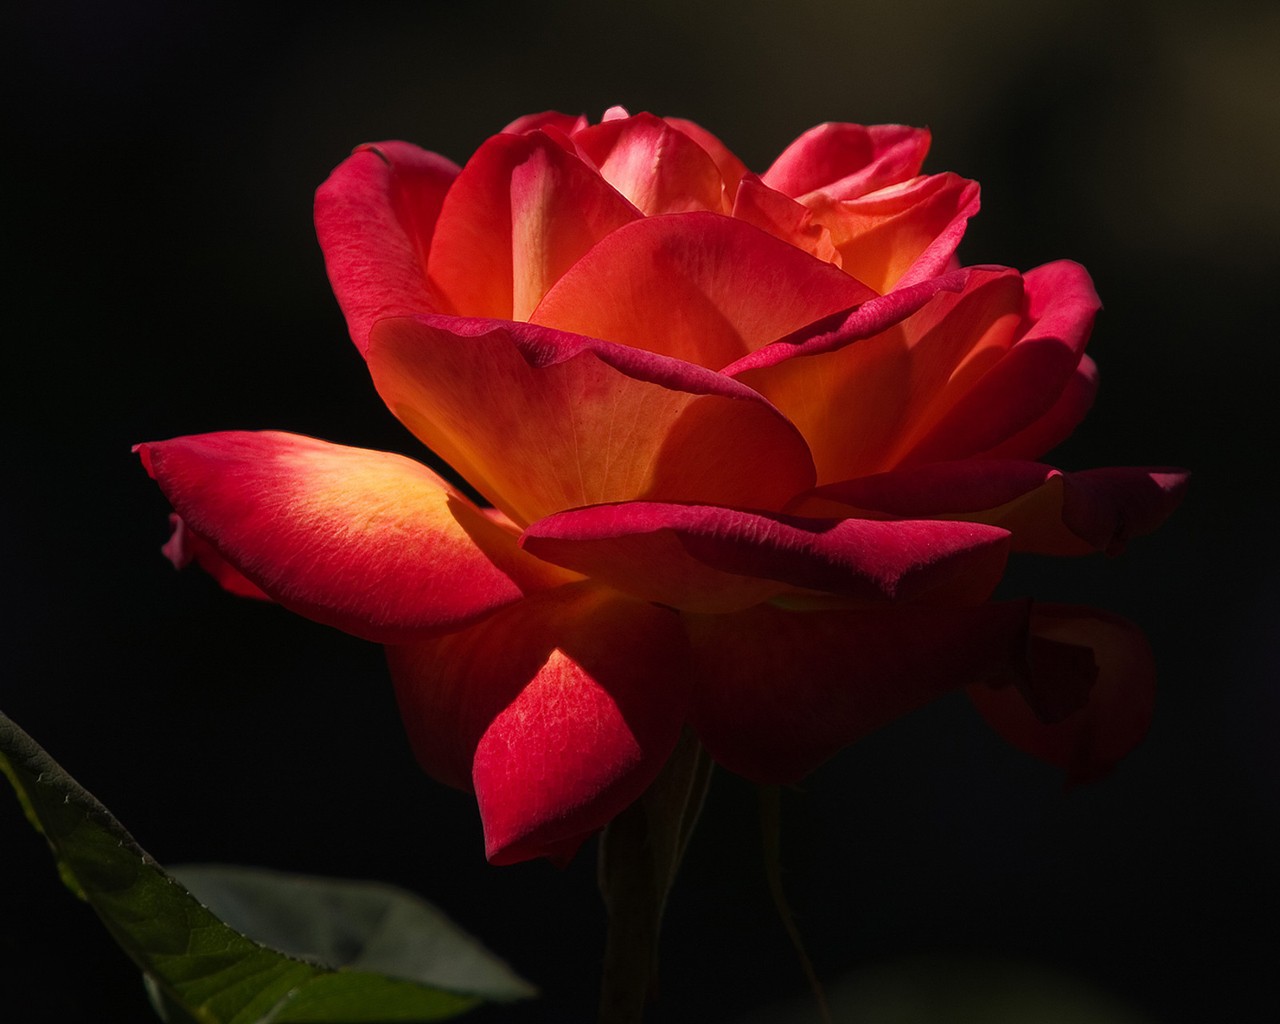 Red rose on a black background wallpapers and images   wallpapers